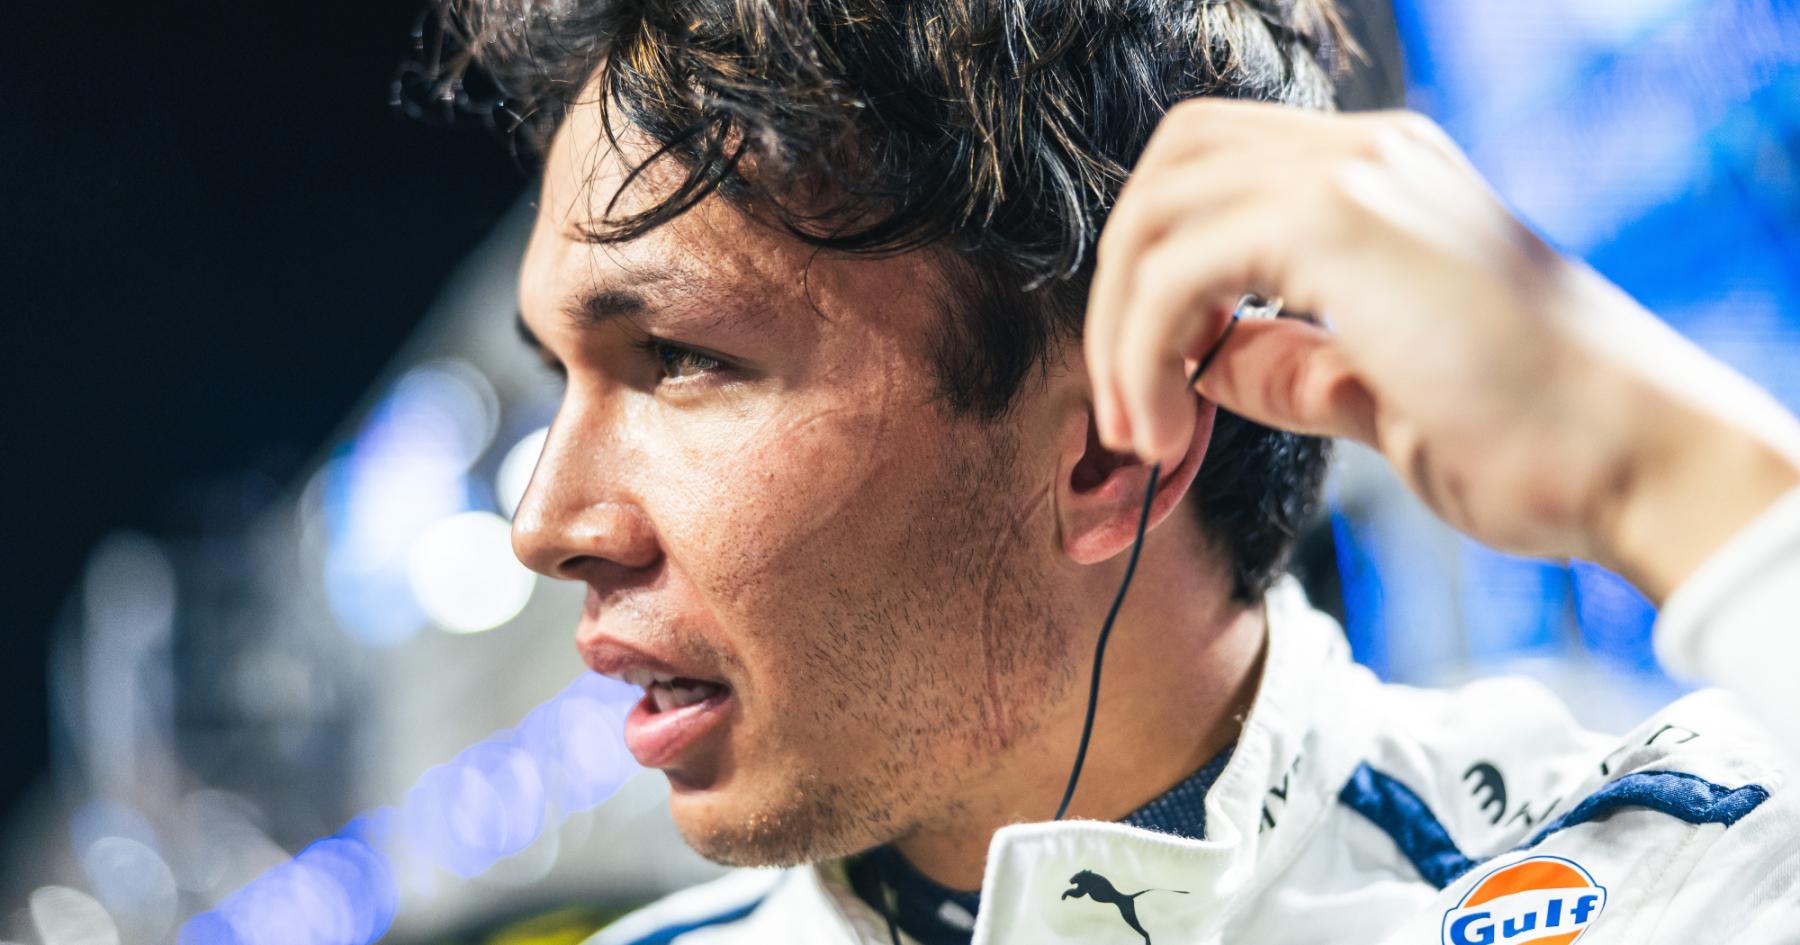 Albon's Bold Decision: Supporting Rival's Advantage in Crucial F1 Acceleration Battle